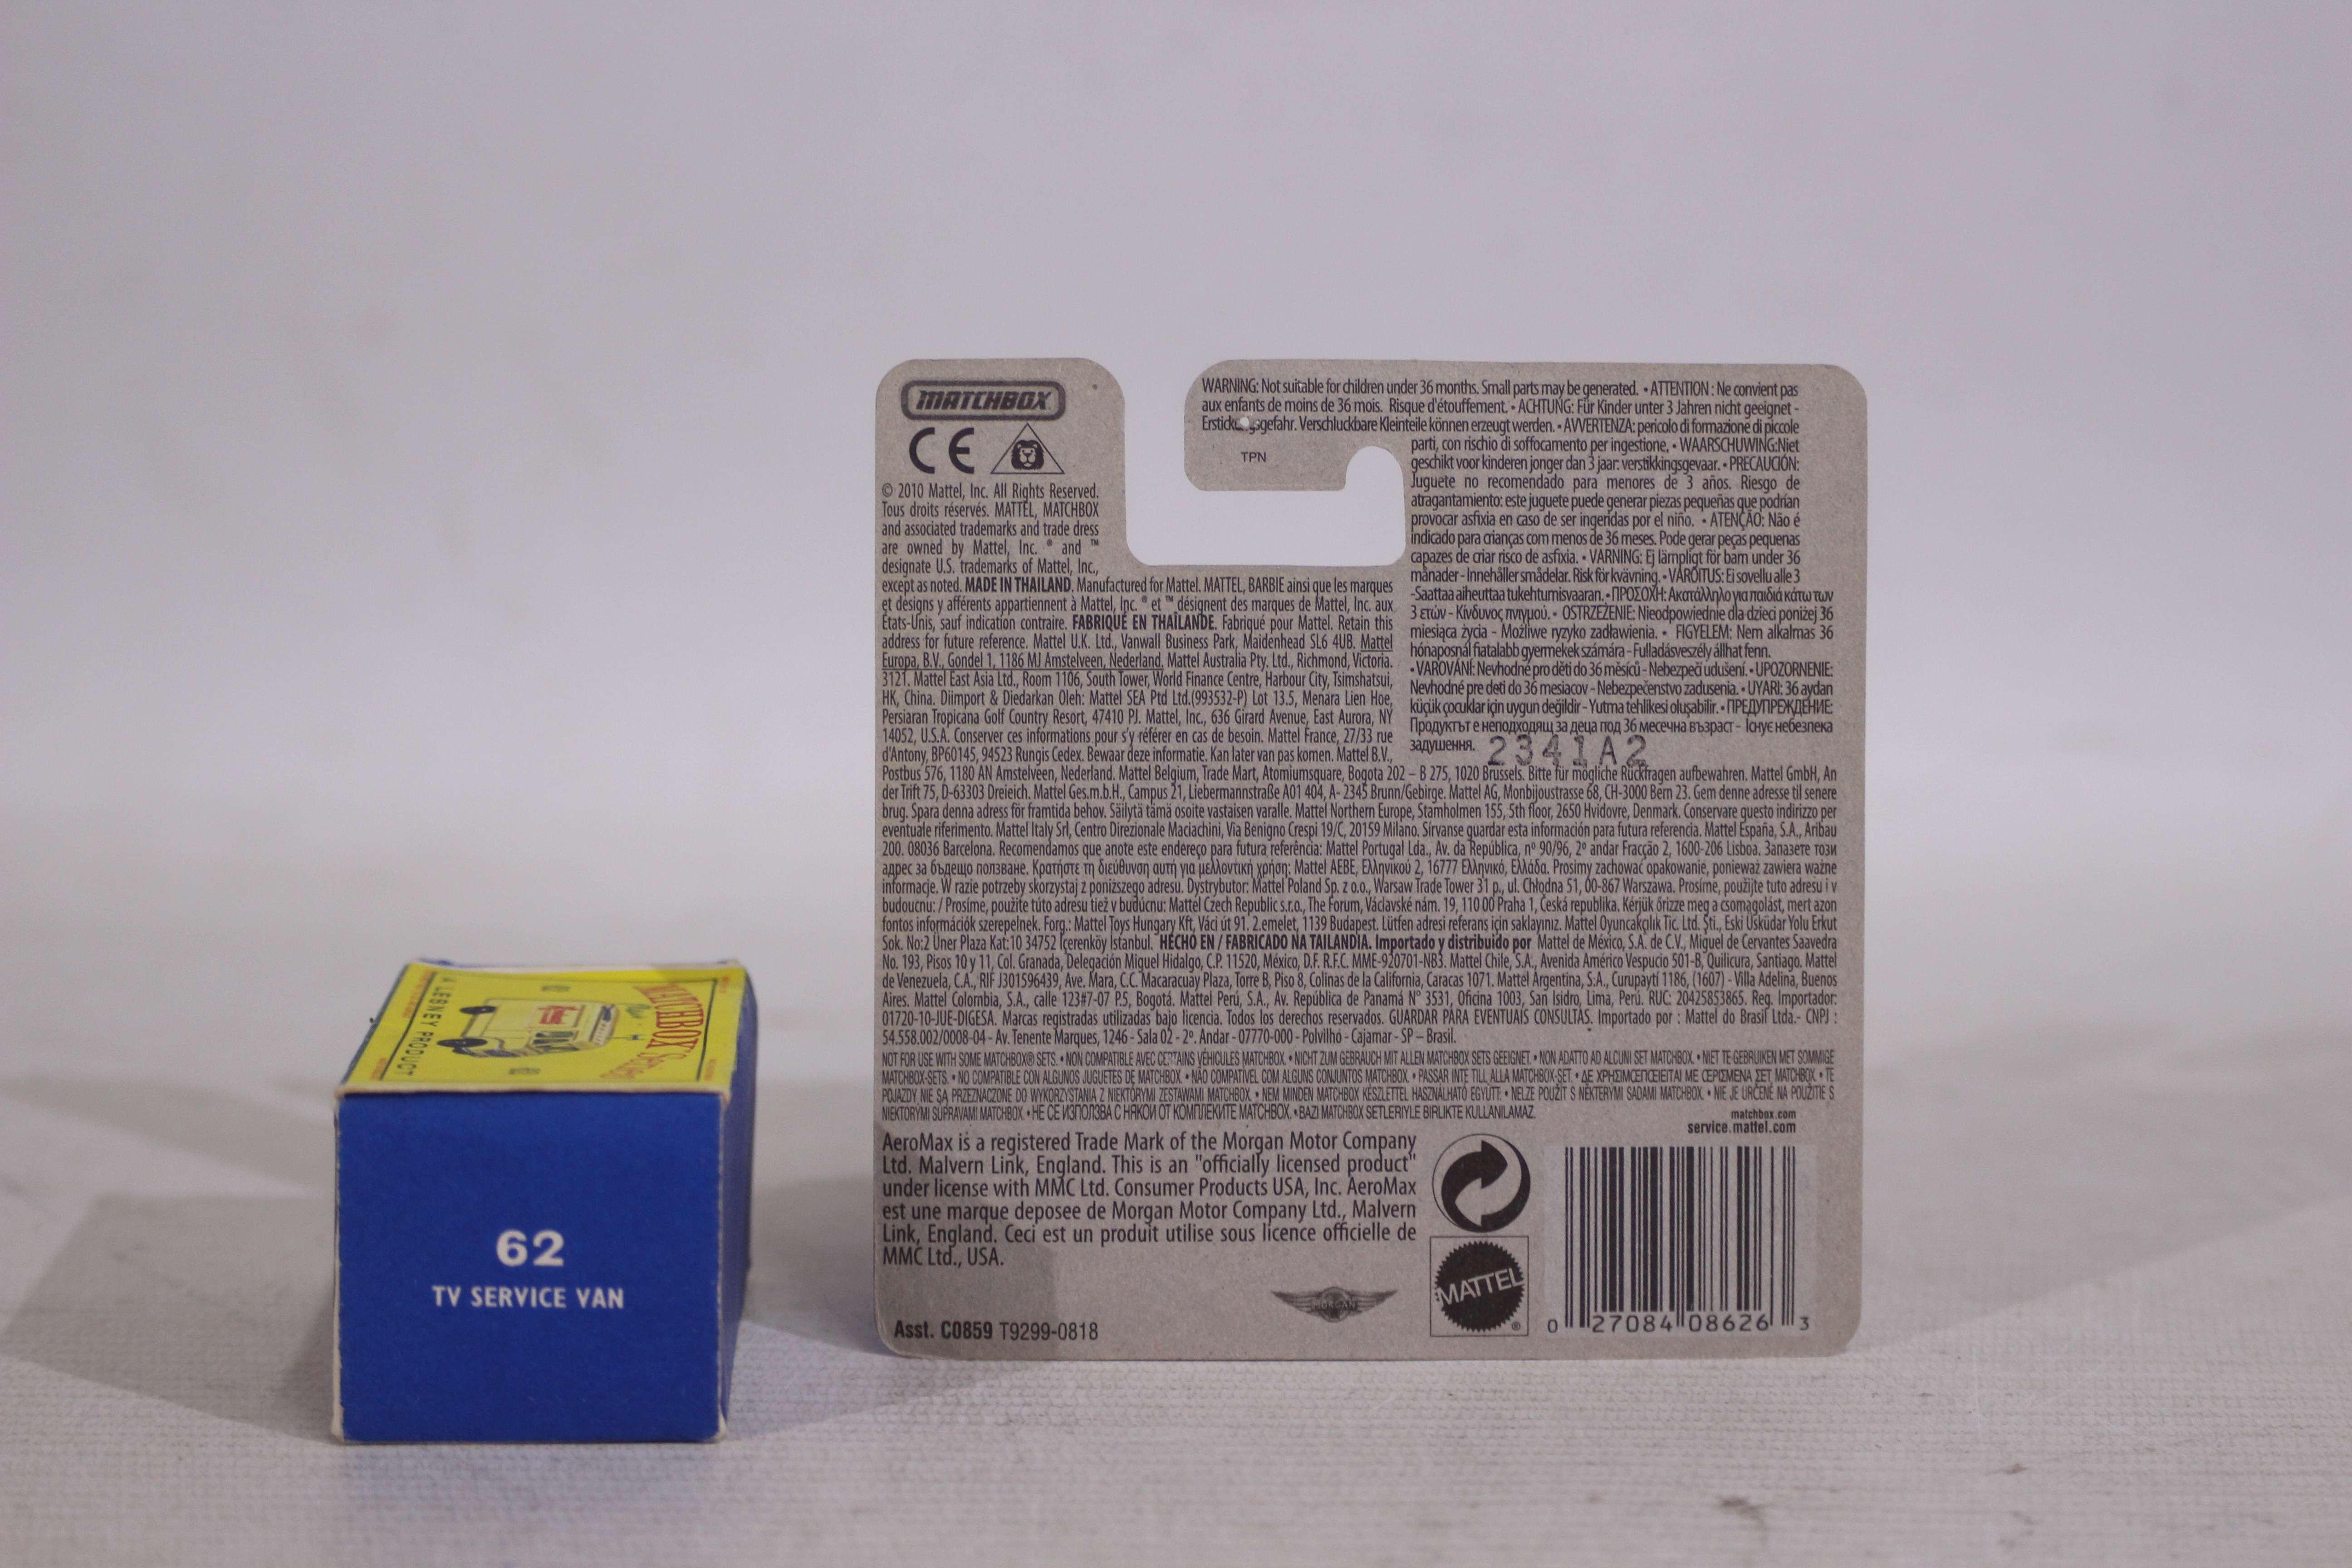 Matchbox - 2 x models, a boxed Commer TV Service van # 62 and a carded Morgan Aeromax # T9299-0818. - Image 6 of 6